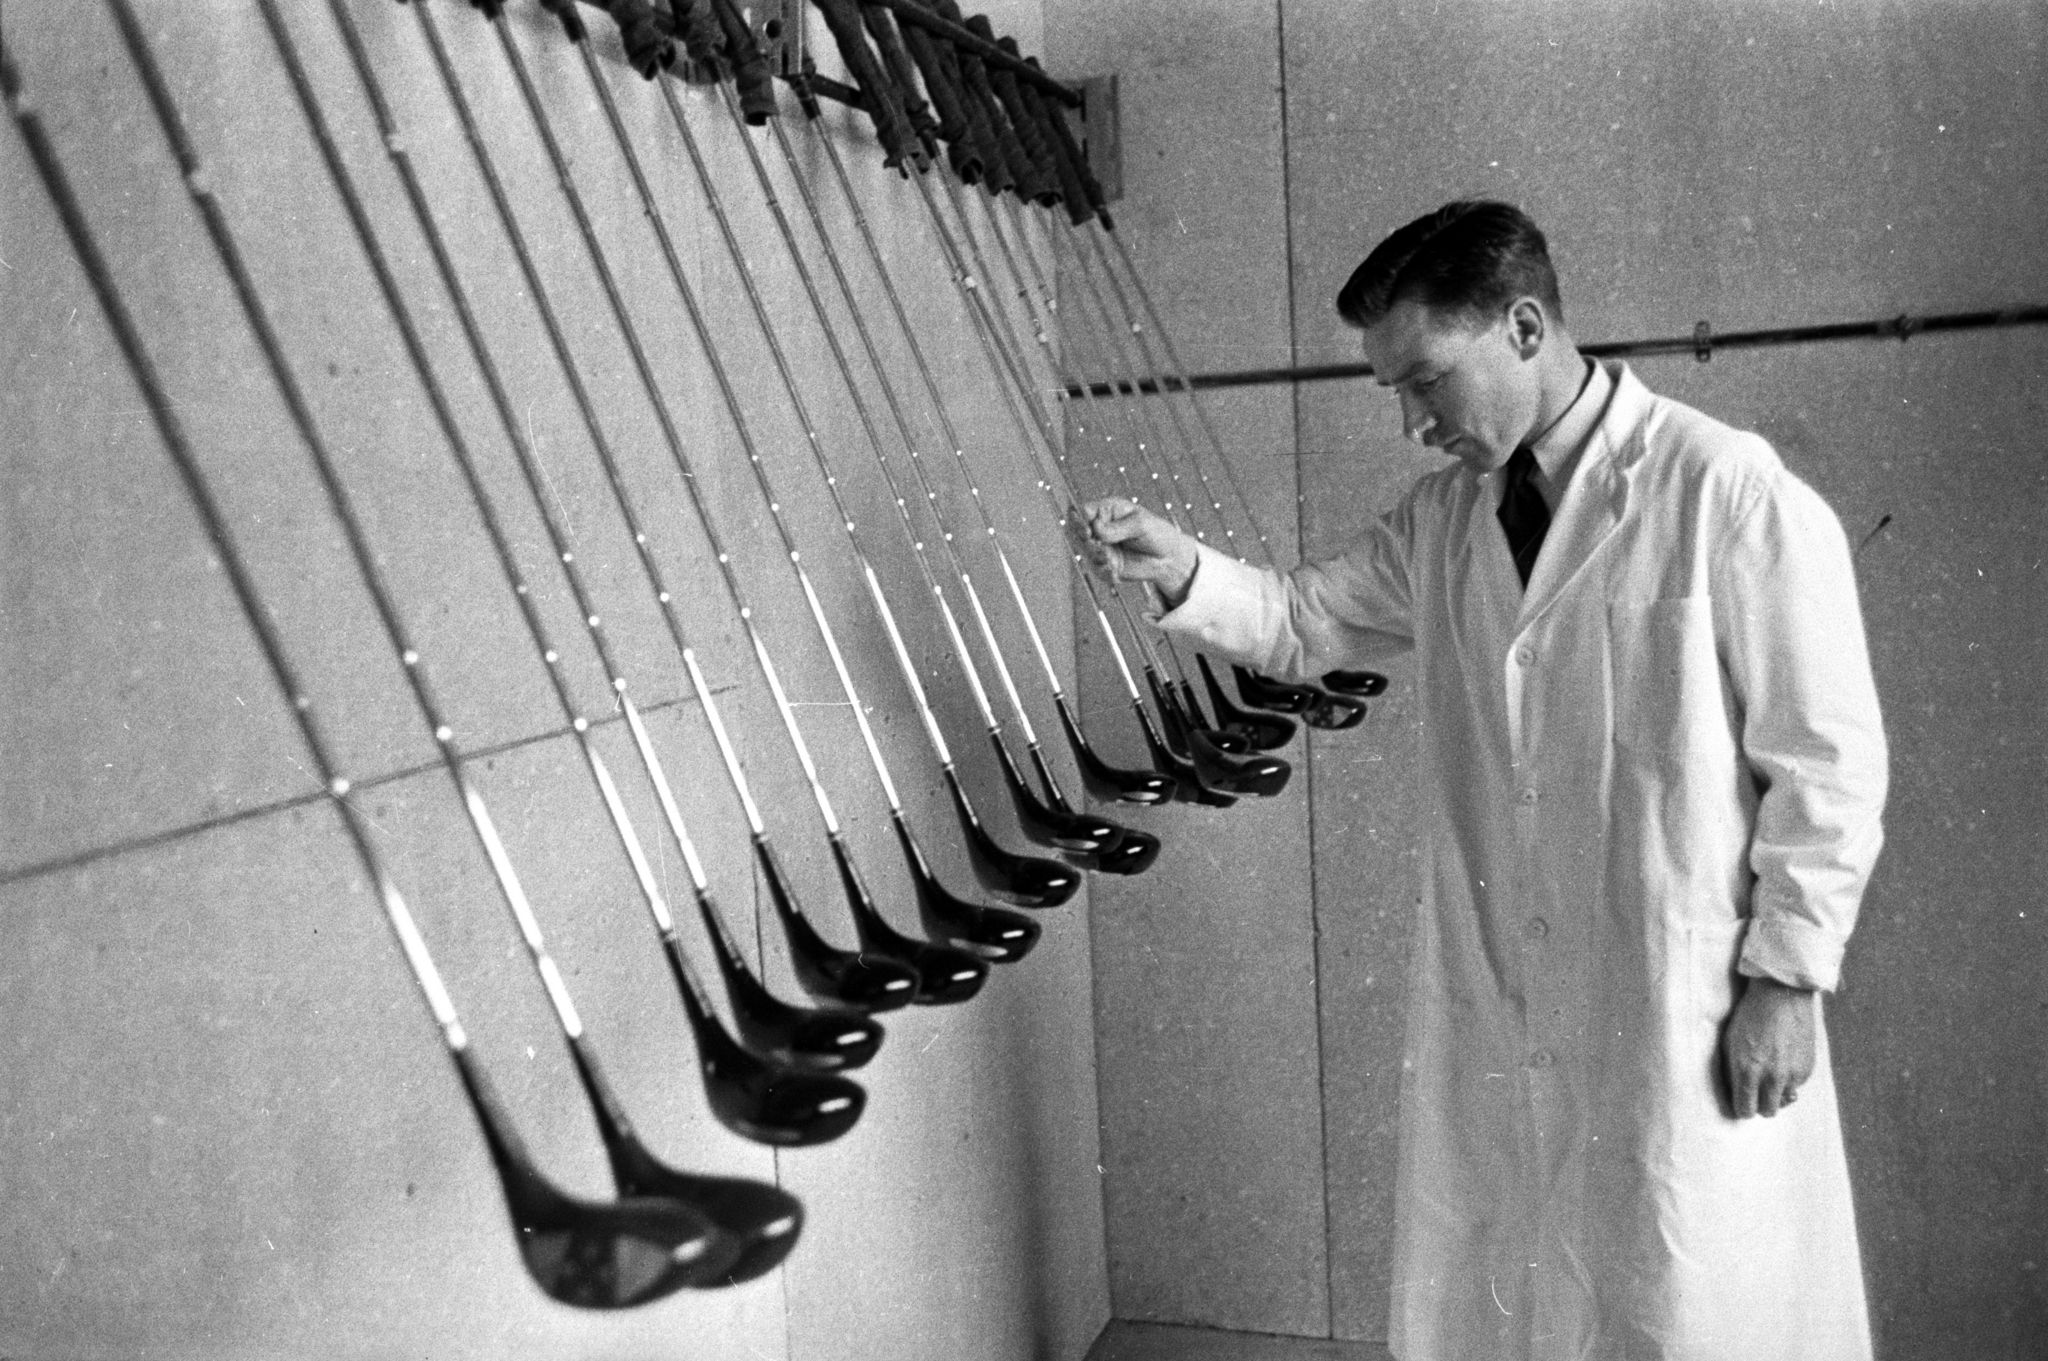 20th August 1955: A line of golf clubs undergoing inspection at the John Letters and Co. factory on Hillington Industrial Estate, Glasgow. The factory produces around 6,000 golf clubs a month and increased demand has lead to a doubling of production in a year. The clubs are sold in Scotland, where the sport is very popular, and also exported around the world. Original Publication: Picture Post - 7942 - Let Glasgow Flourish! - pub. 1955 (Photo by Haywood Magee/Picture Post/Hulton Archive/Getty Images)